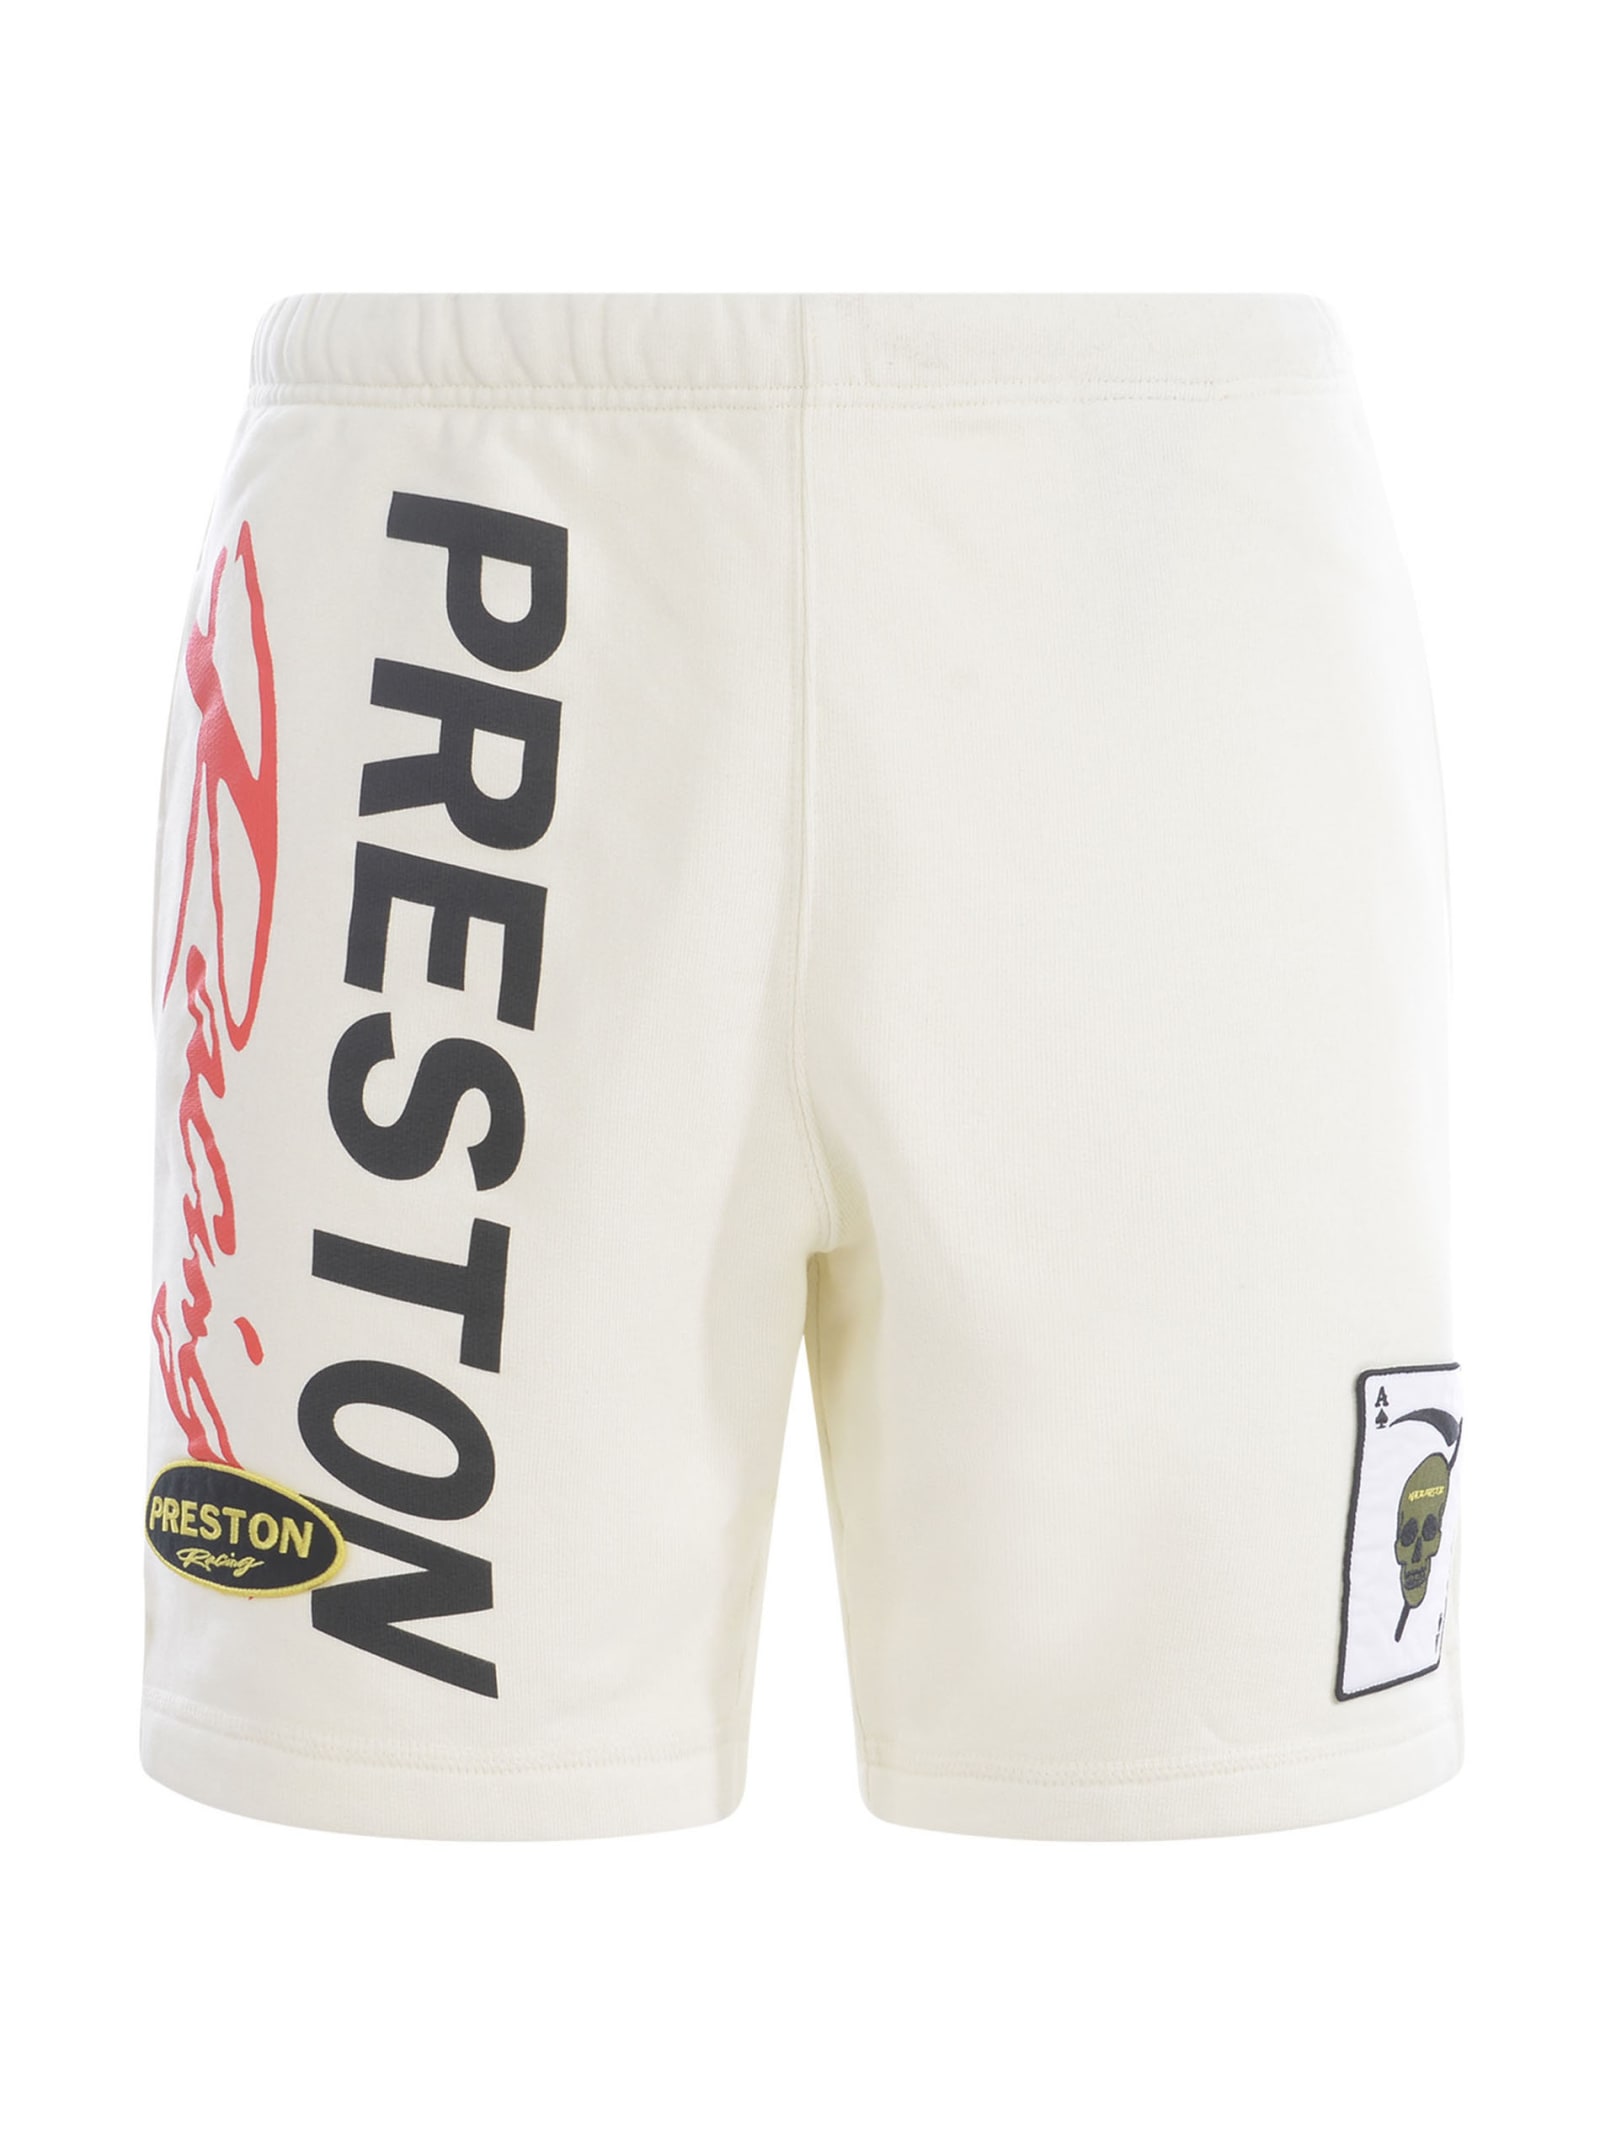 HERON PRESTON SHORTS HERON PRESTON PRESTON RACING IN COTTON